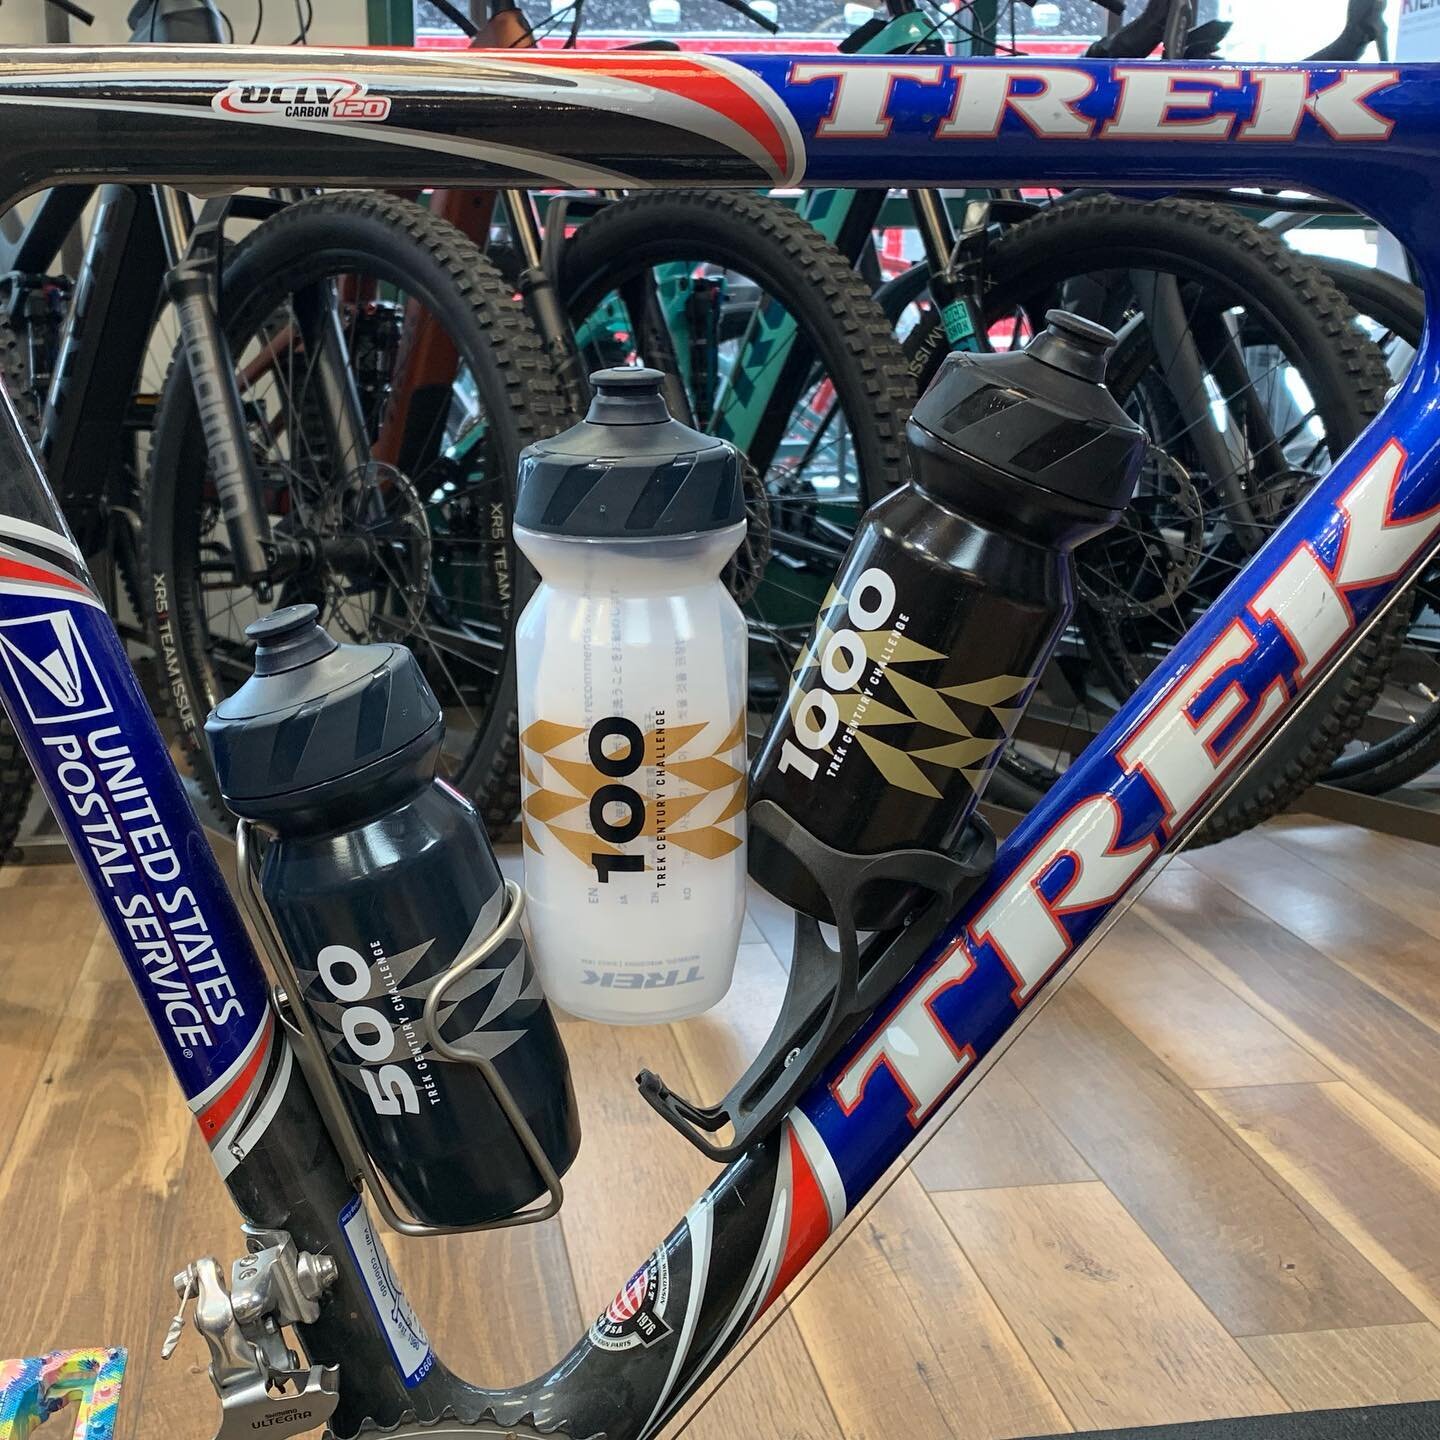 Were you part of the @trekbikes @strava challenge this summer? Come pick up your water bottle and try your luck winning a bonus prize&mdash;each bottle has a scratcher ticket for a chance to win, but prizes must be claimed by Dec 31, so don&rsquo;t w